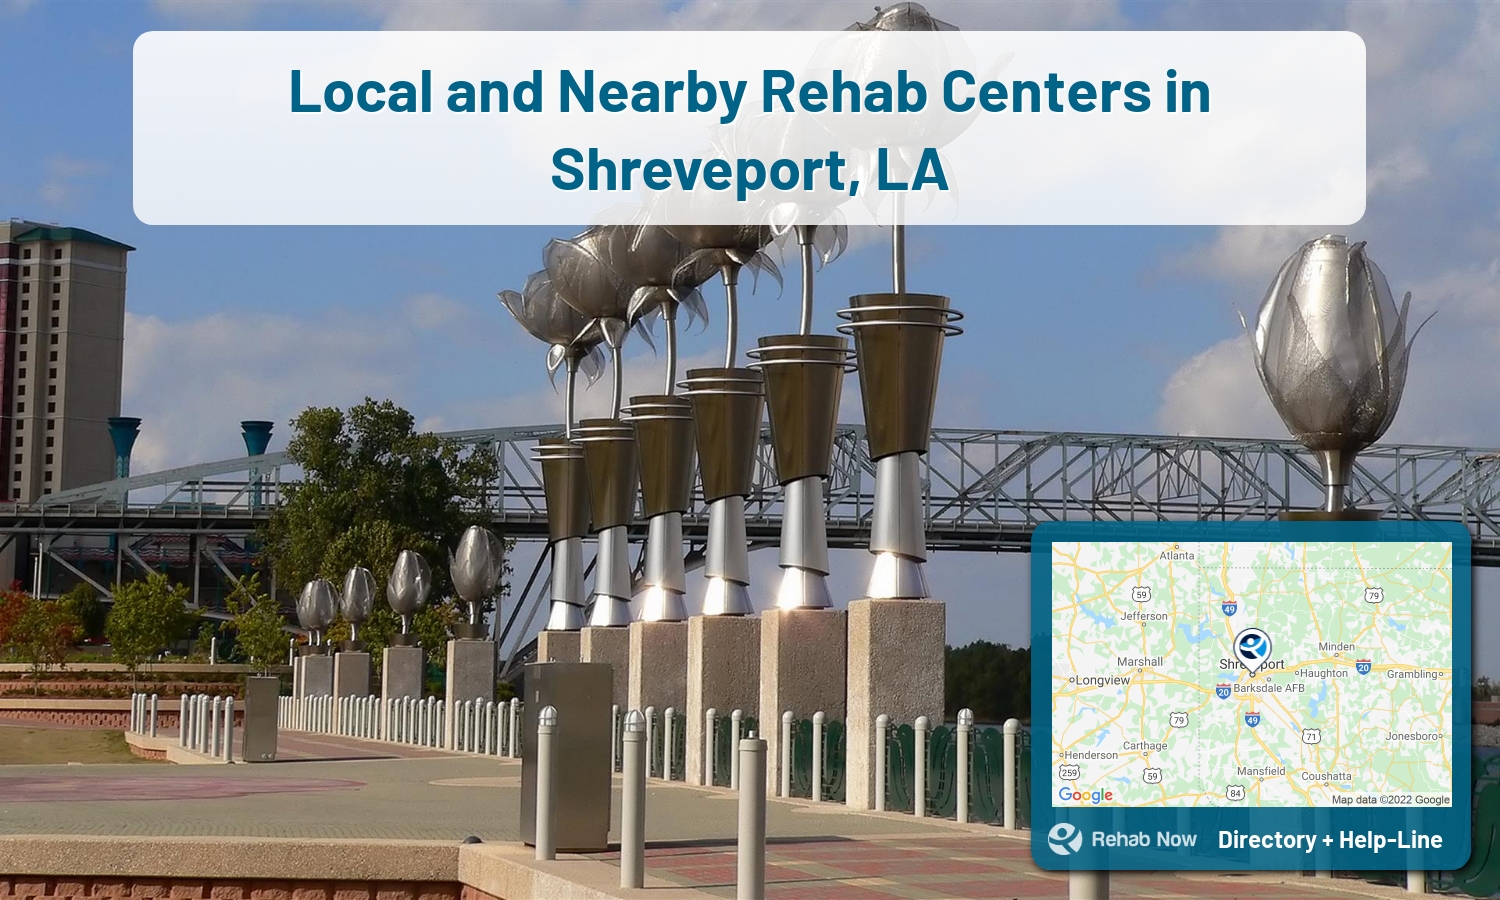 Shreveport, LA Treatment Centers. Find drug rehab in Shreveport, Louisiana, or detox and treatment programs. Get the right help now!